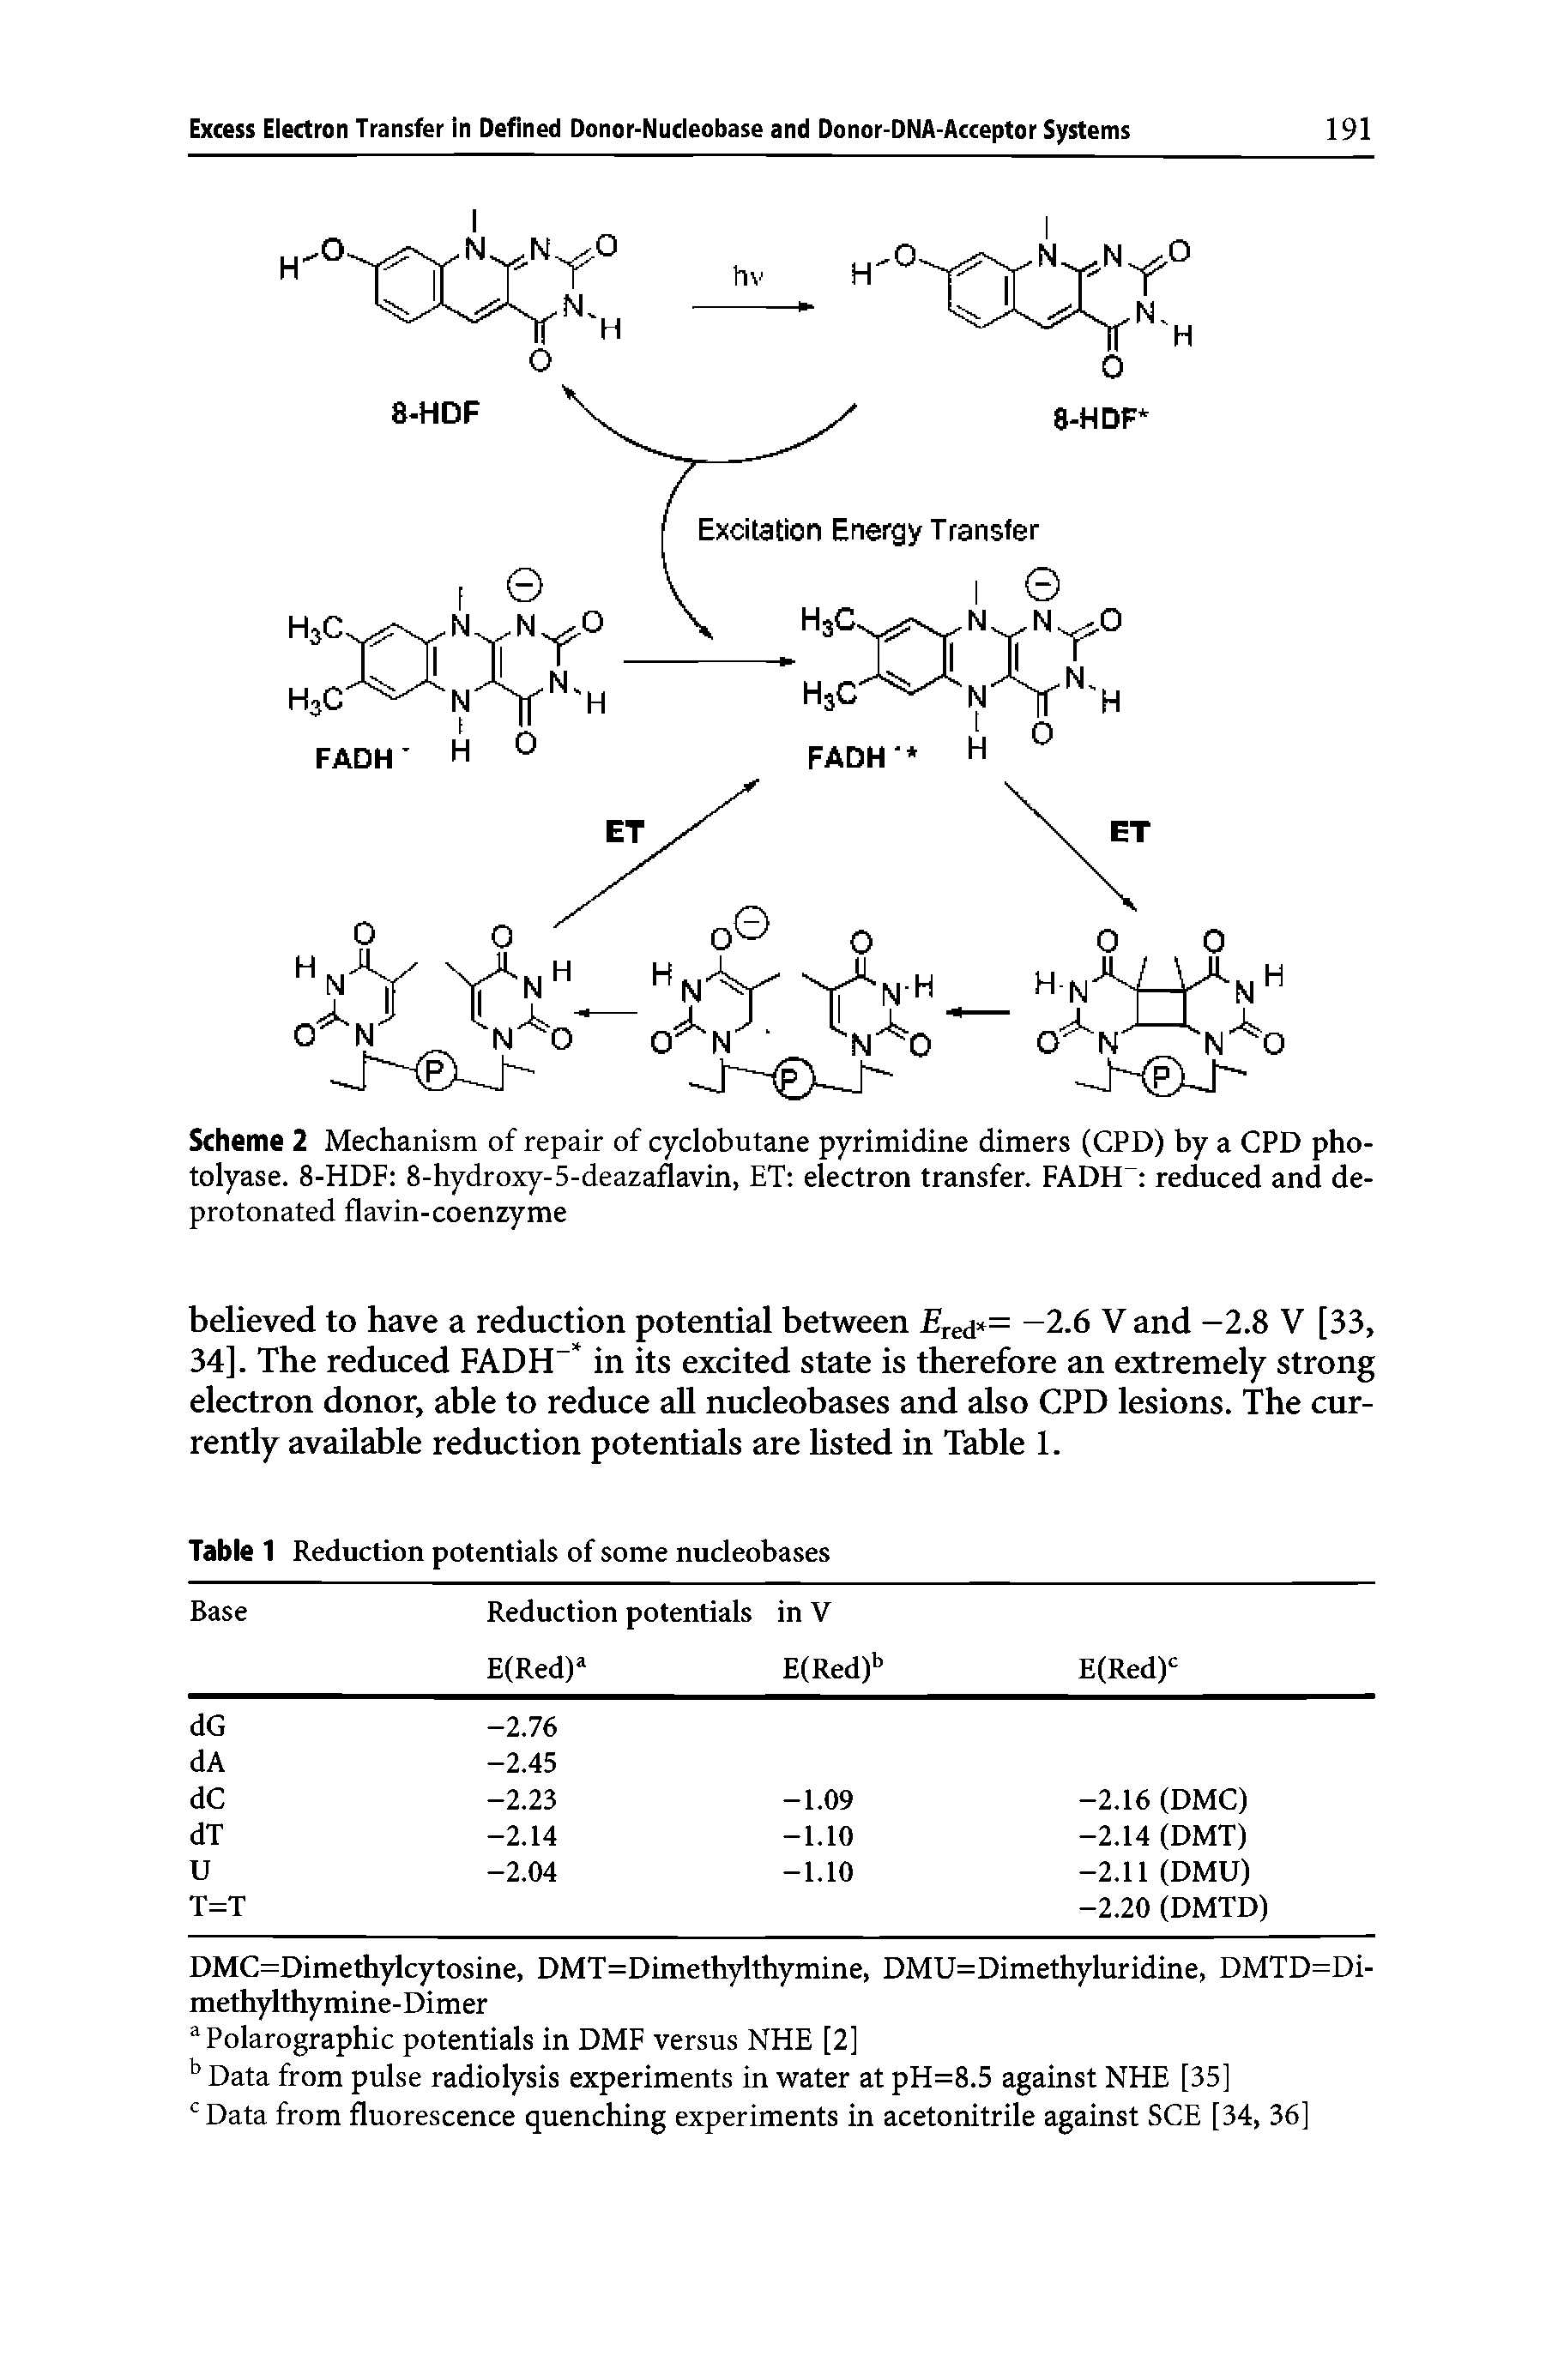 Scheme 2 Mechanism of repair of cyclobutane pyrimidine dimers (CPD) by a CPD photolyase. 8-HDF 8-hydroxy-5-deazaflavin, ET electron transfer. FADH reduced and de-protonated flavin-coenzyme...